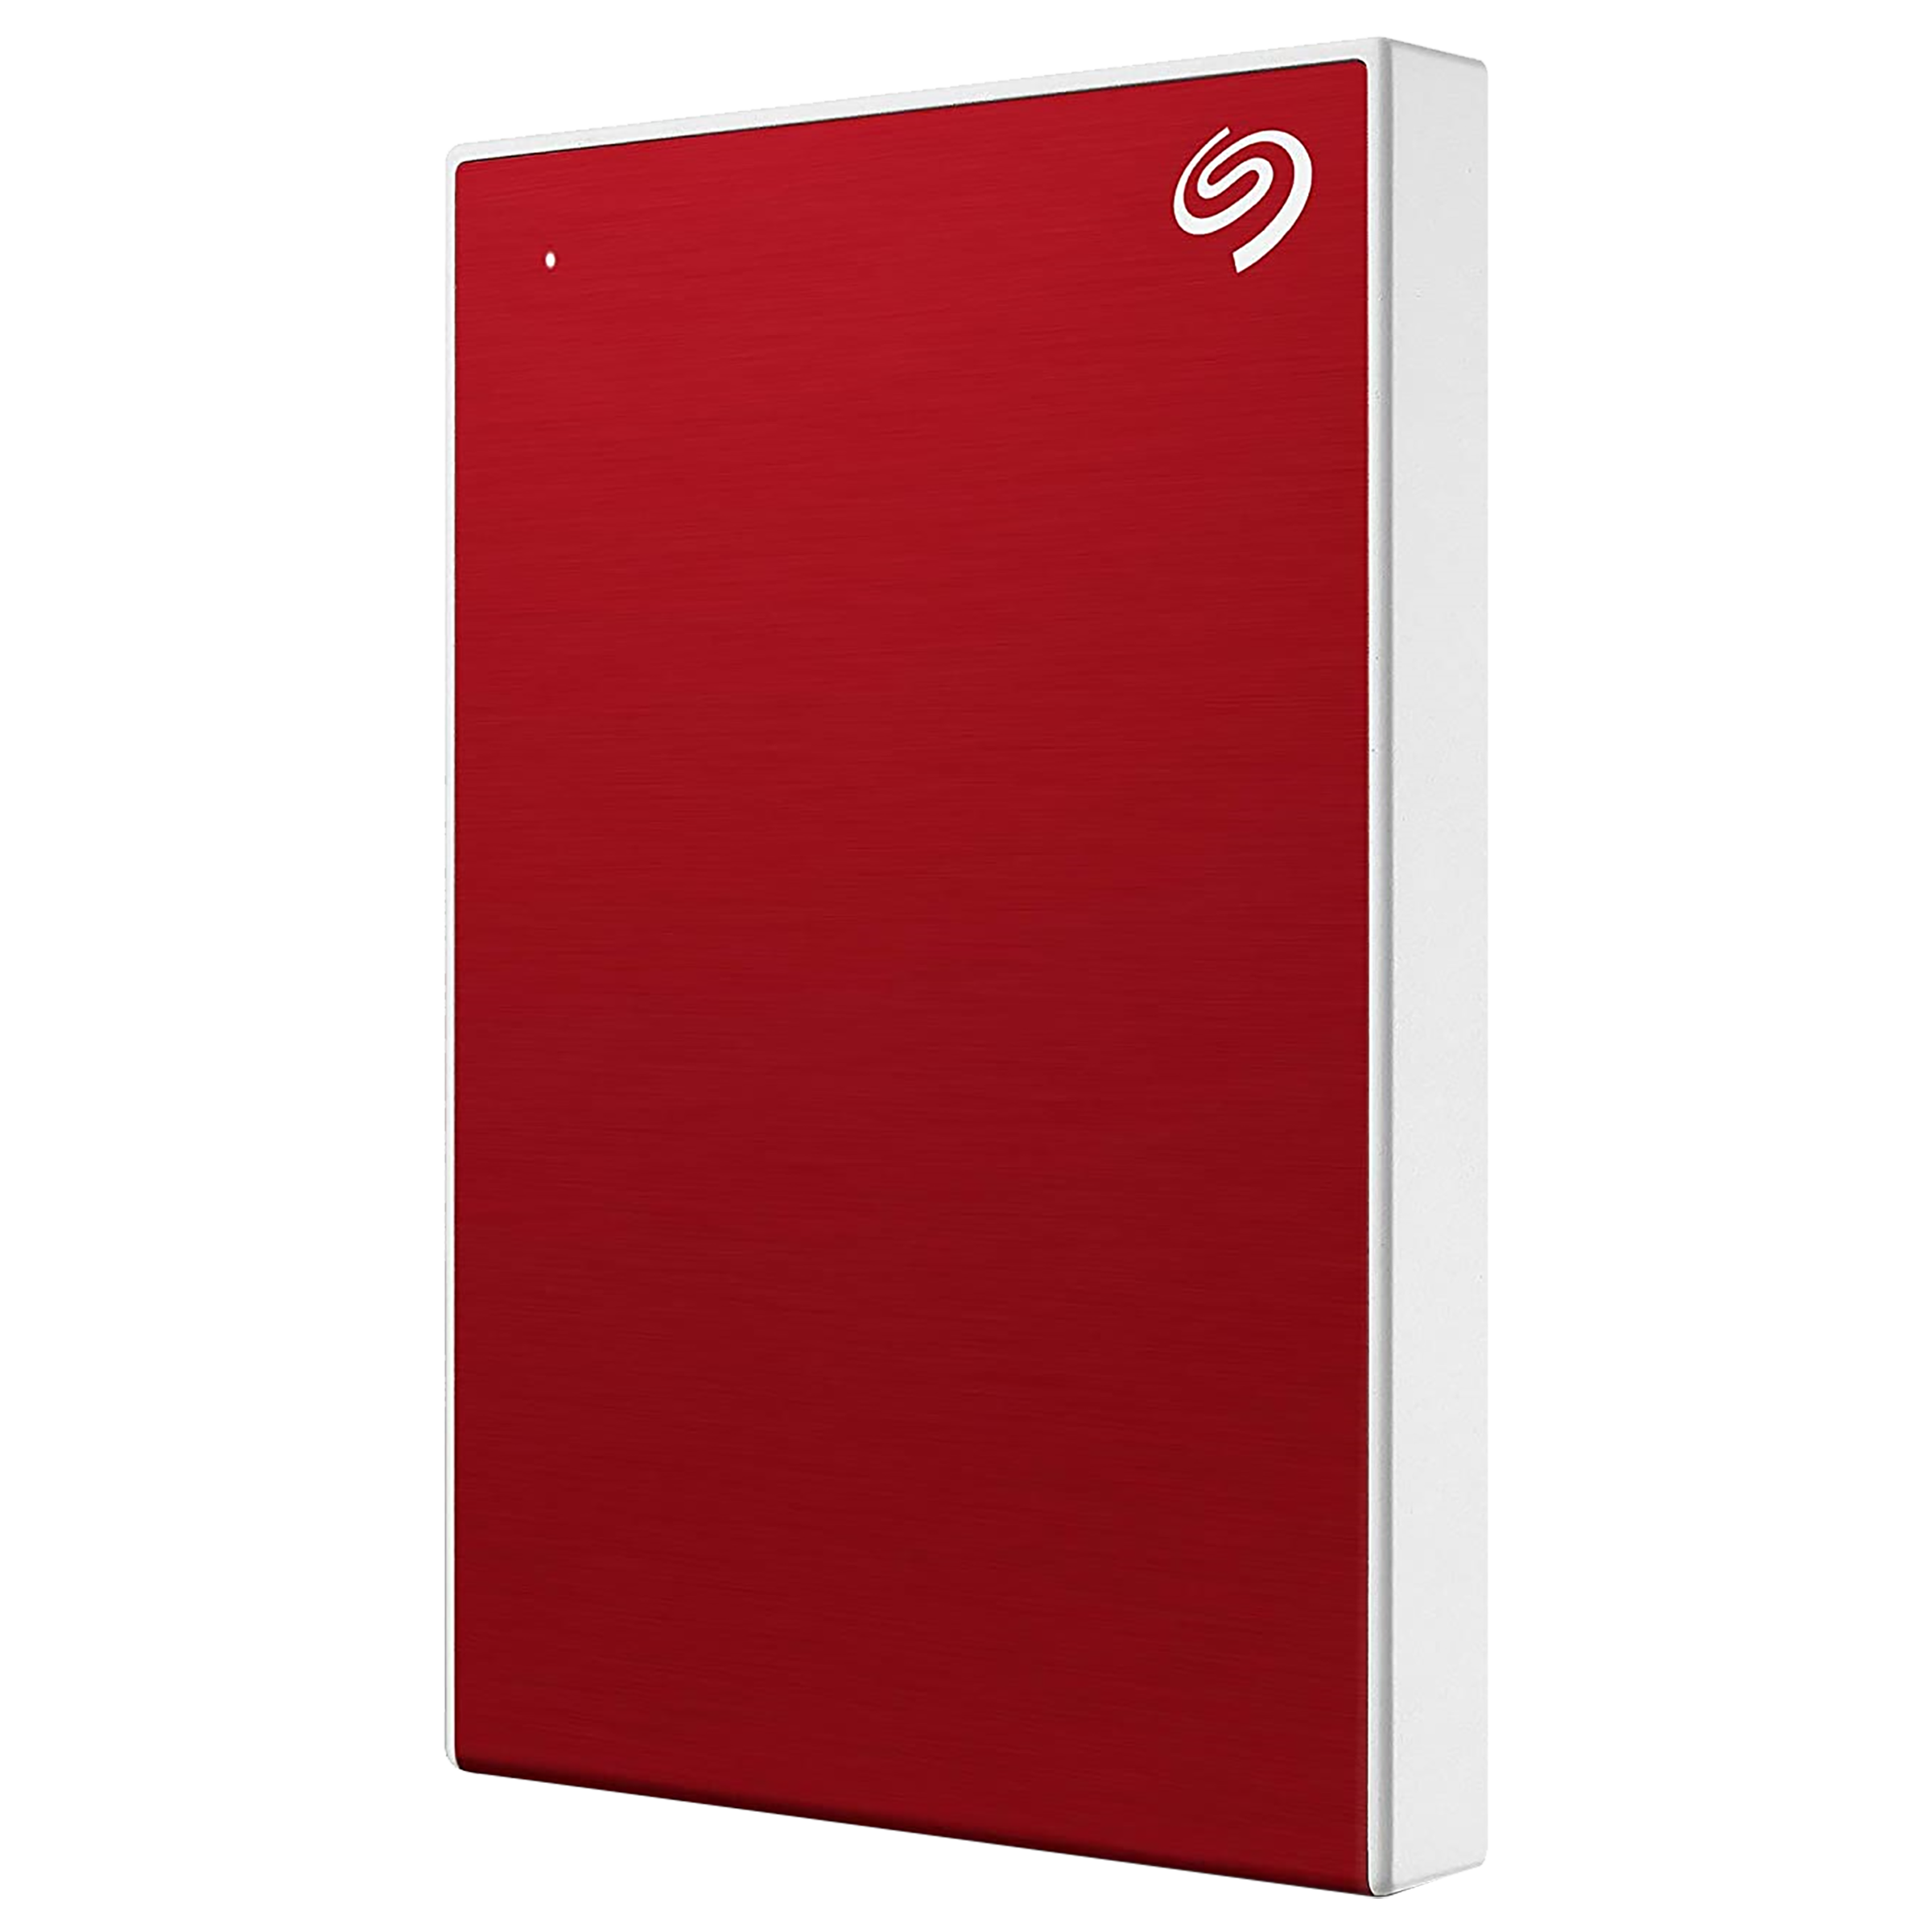 Seagate - Seagate One Touch 2TB USB 3.0 Hard Disk Drive (Advanced Password Protection, STKY2000403, Red)